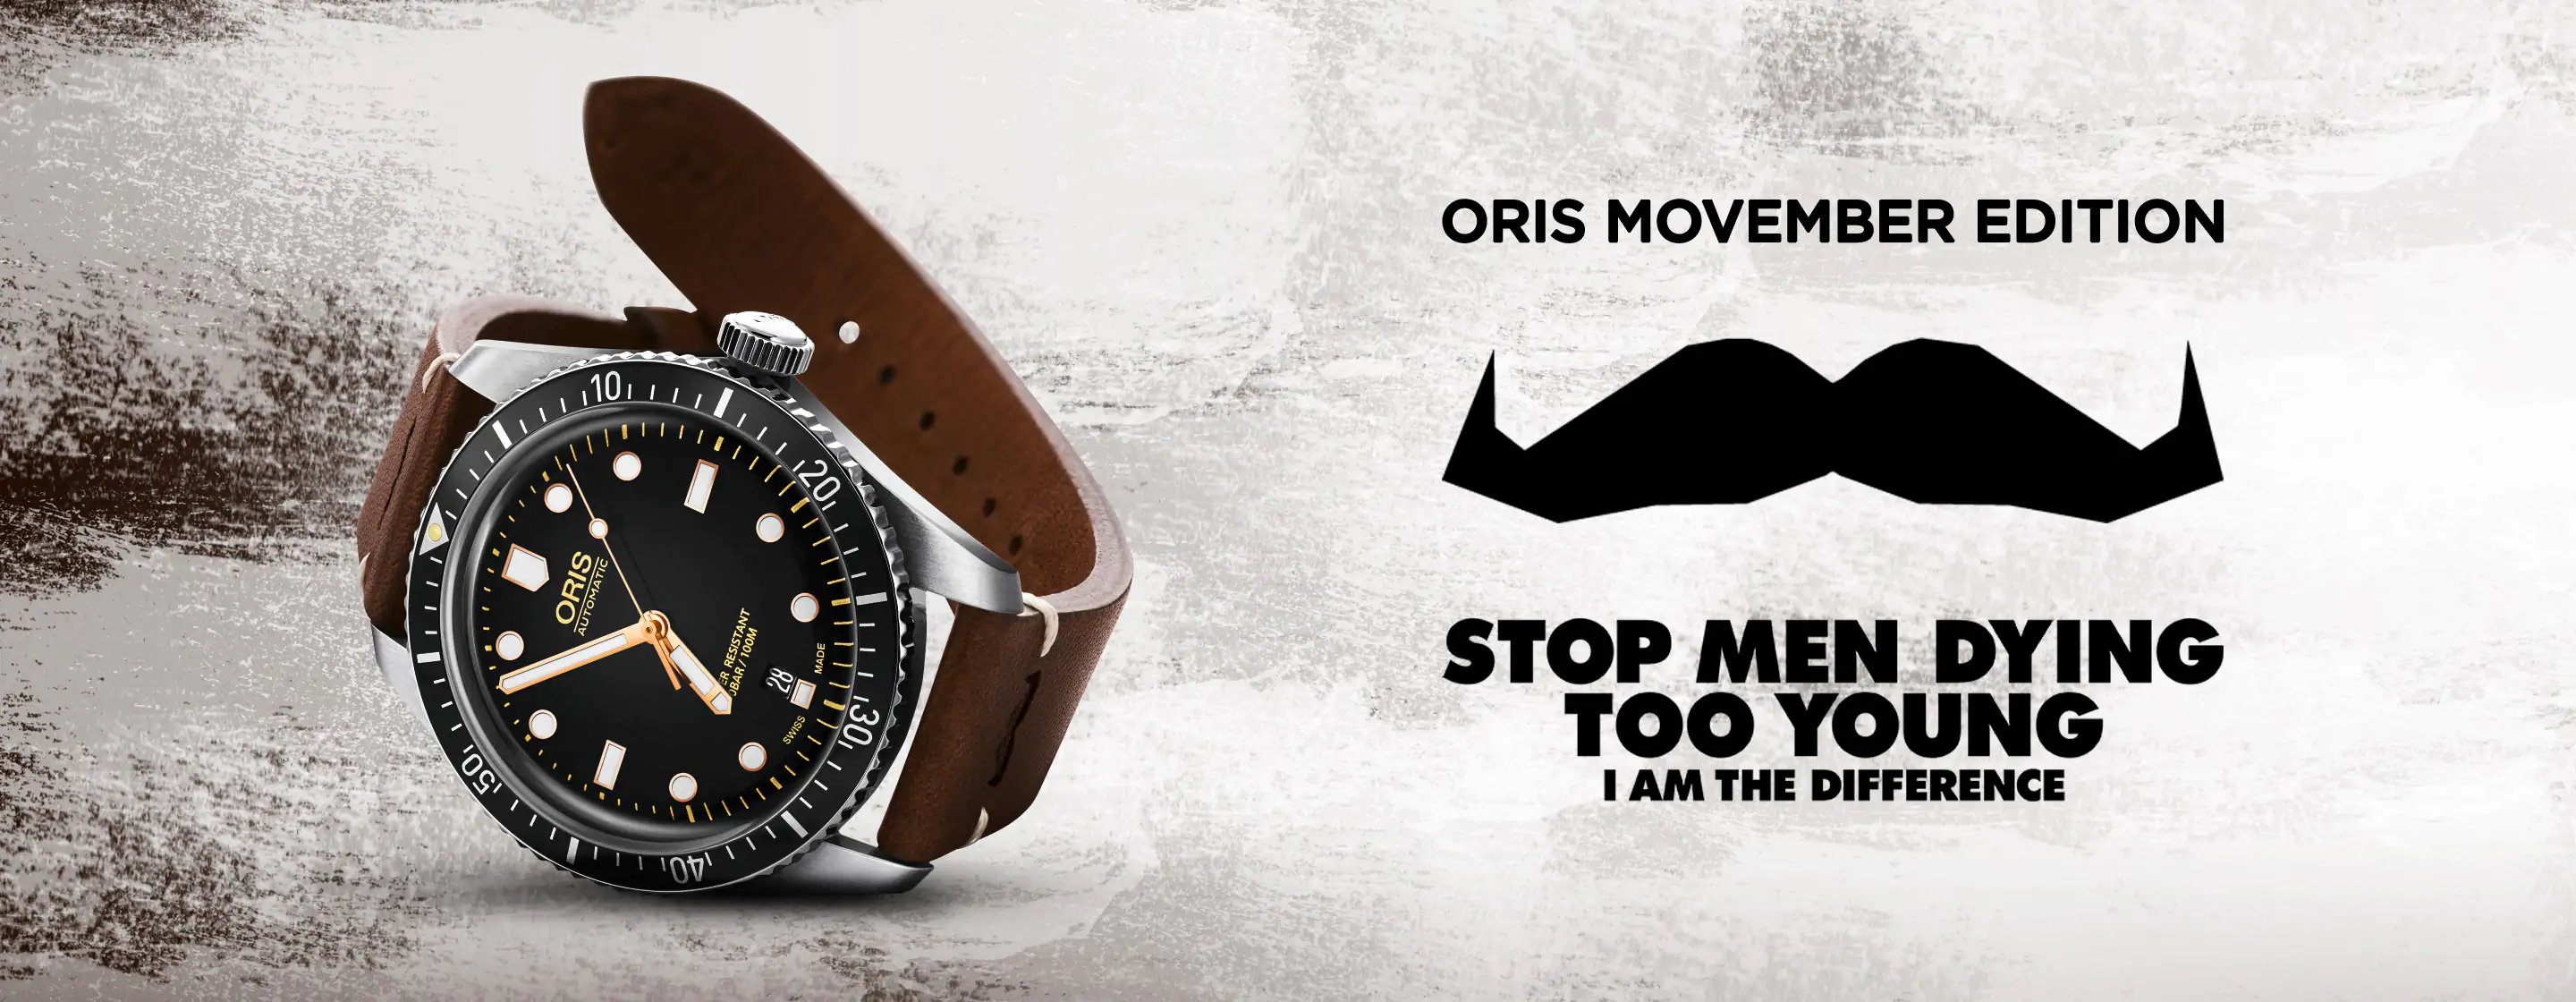 Oris-Movember-Edition-special-watch-for-a-cause-Mens-health-November-masthead-image